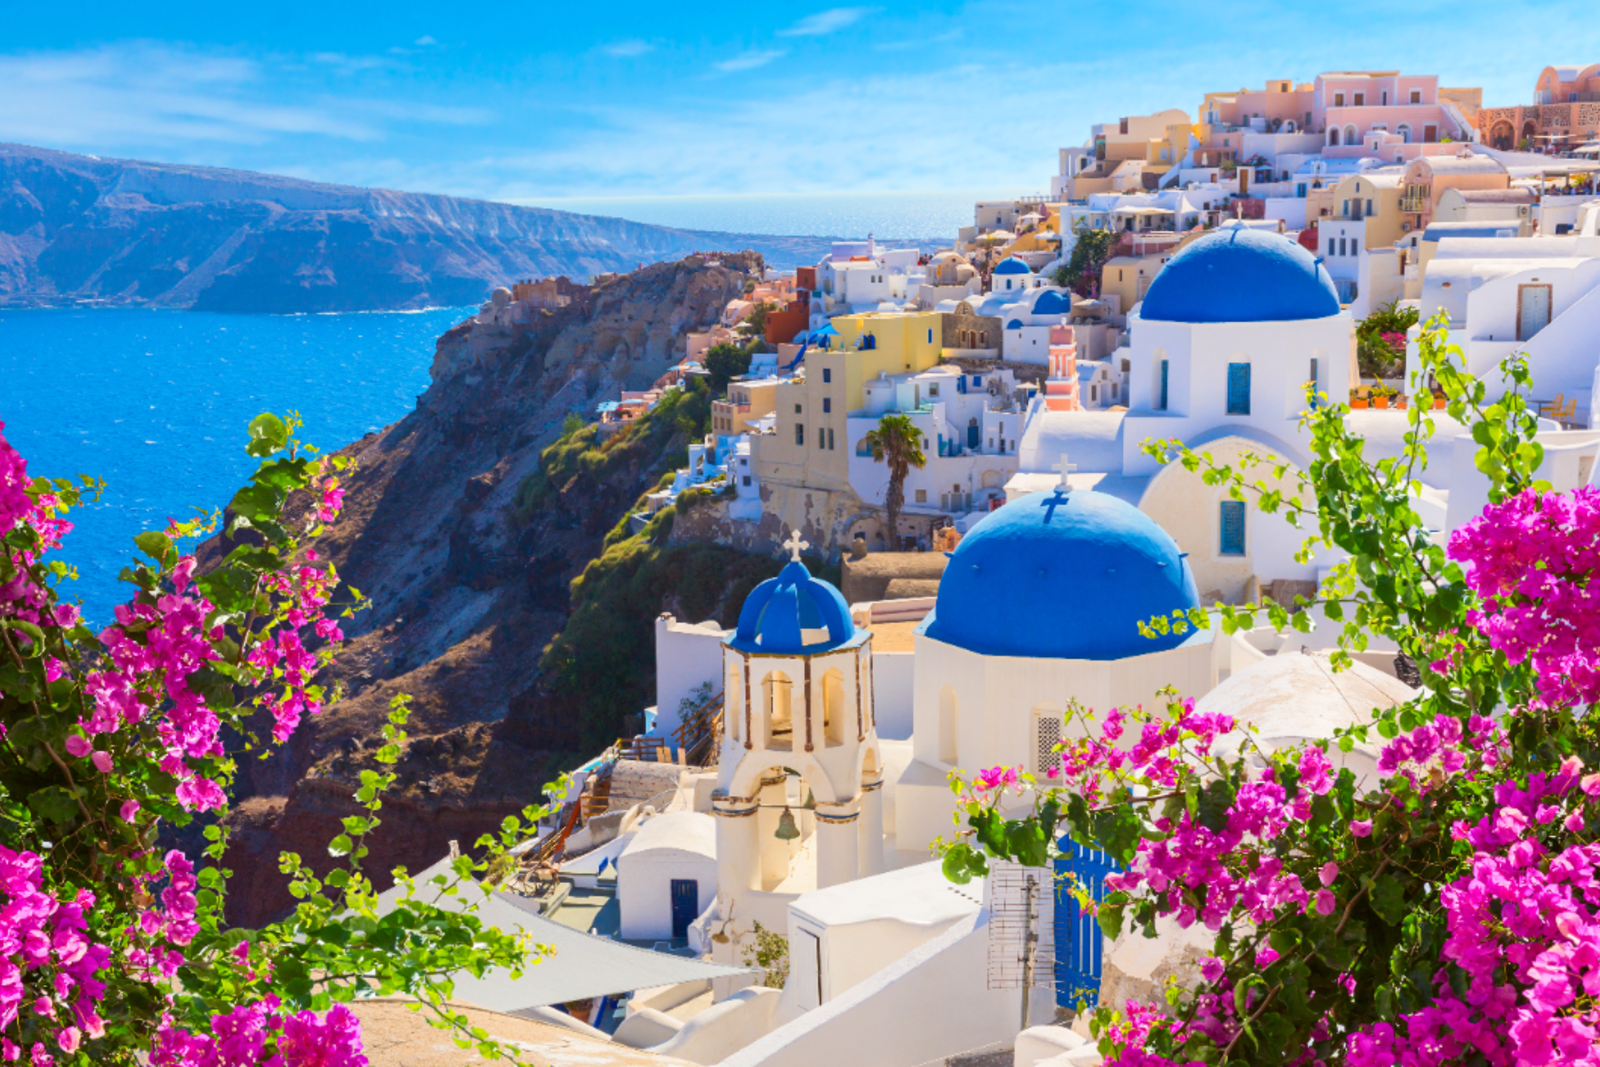 The blue-domed houses on Santorini are iconic